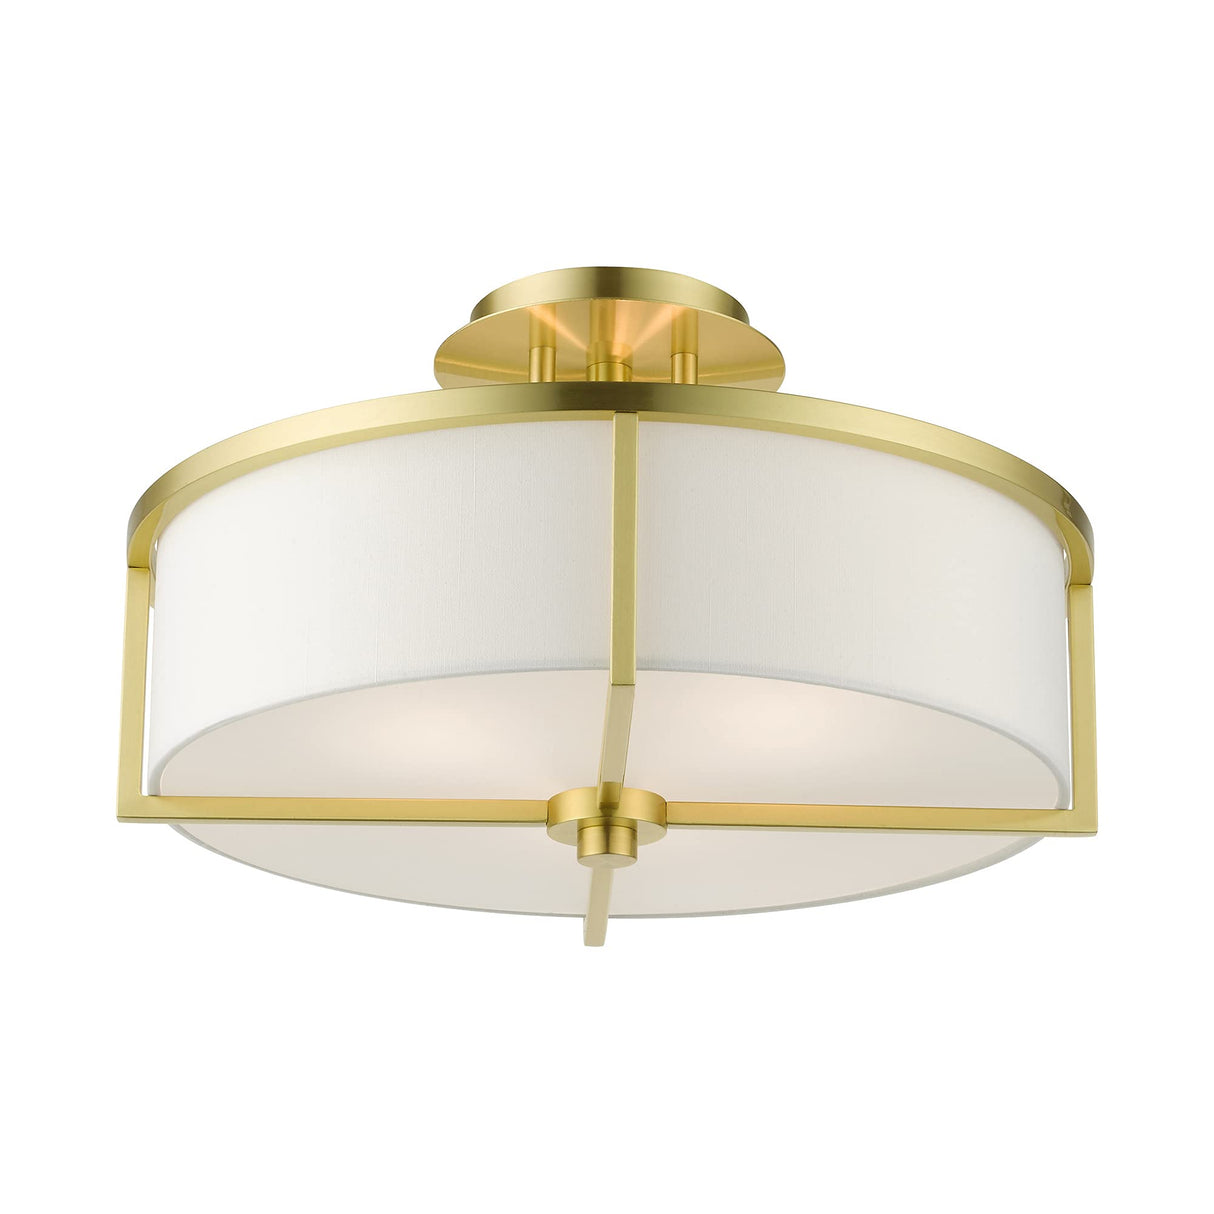 Livex Lighting 51074-12 Wesley Collection 3-Light Semi Flush Mount Ceiling Light with Off-White Hardback Fabric Shade, Satin Brass, 16 x 16 x 9.25